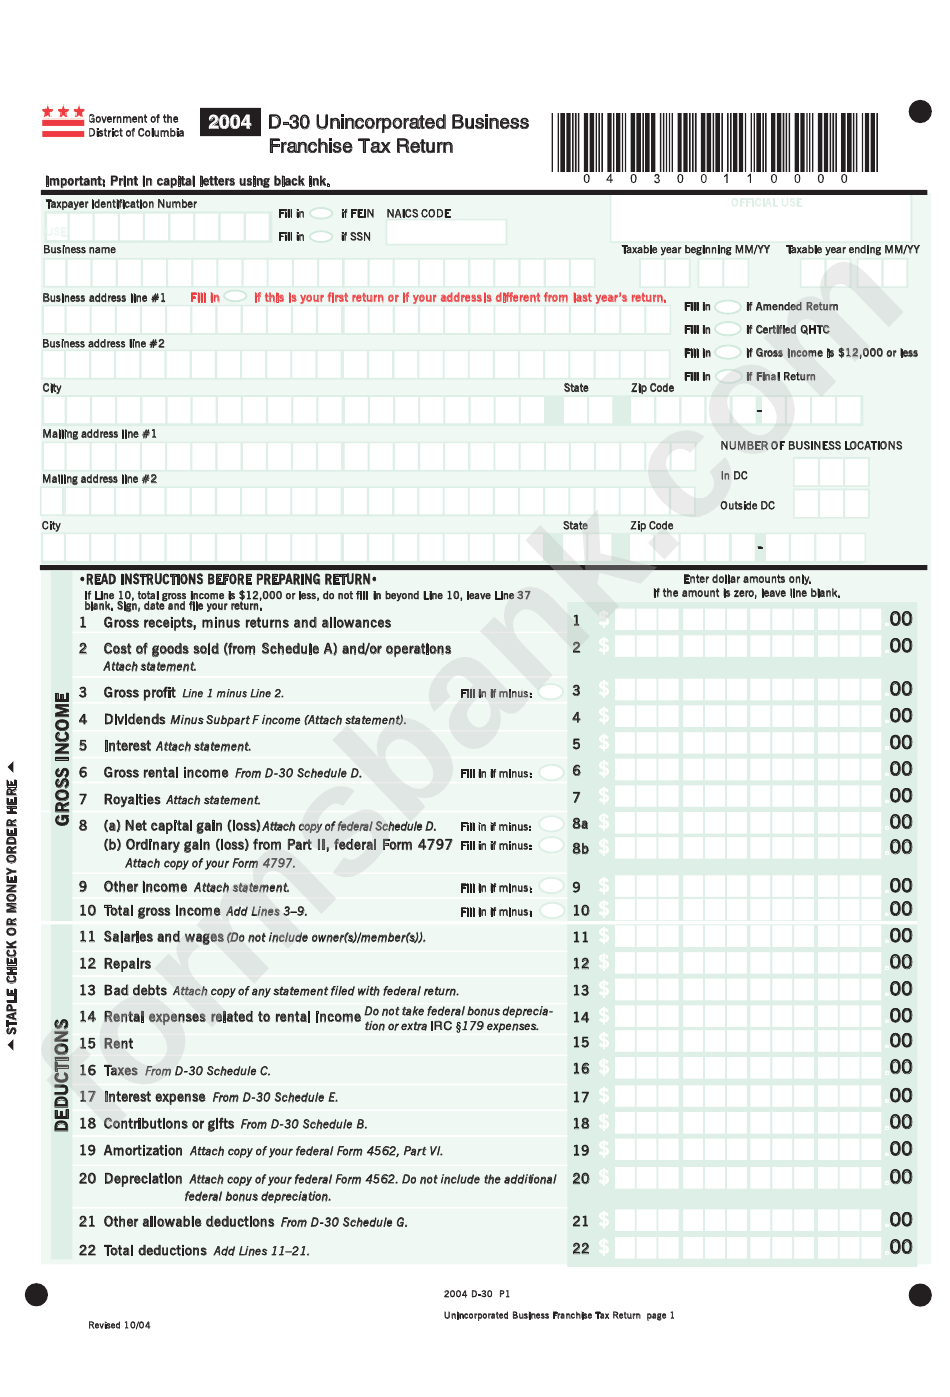 Form D-30 - Unincorporated Business Franchise Tax Return - 2004